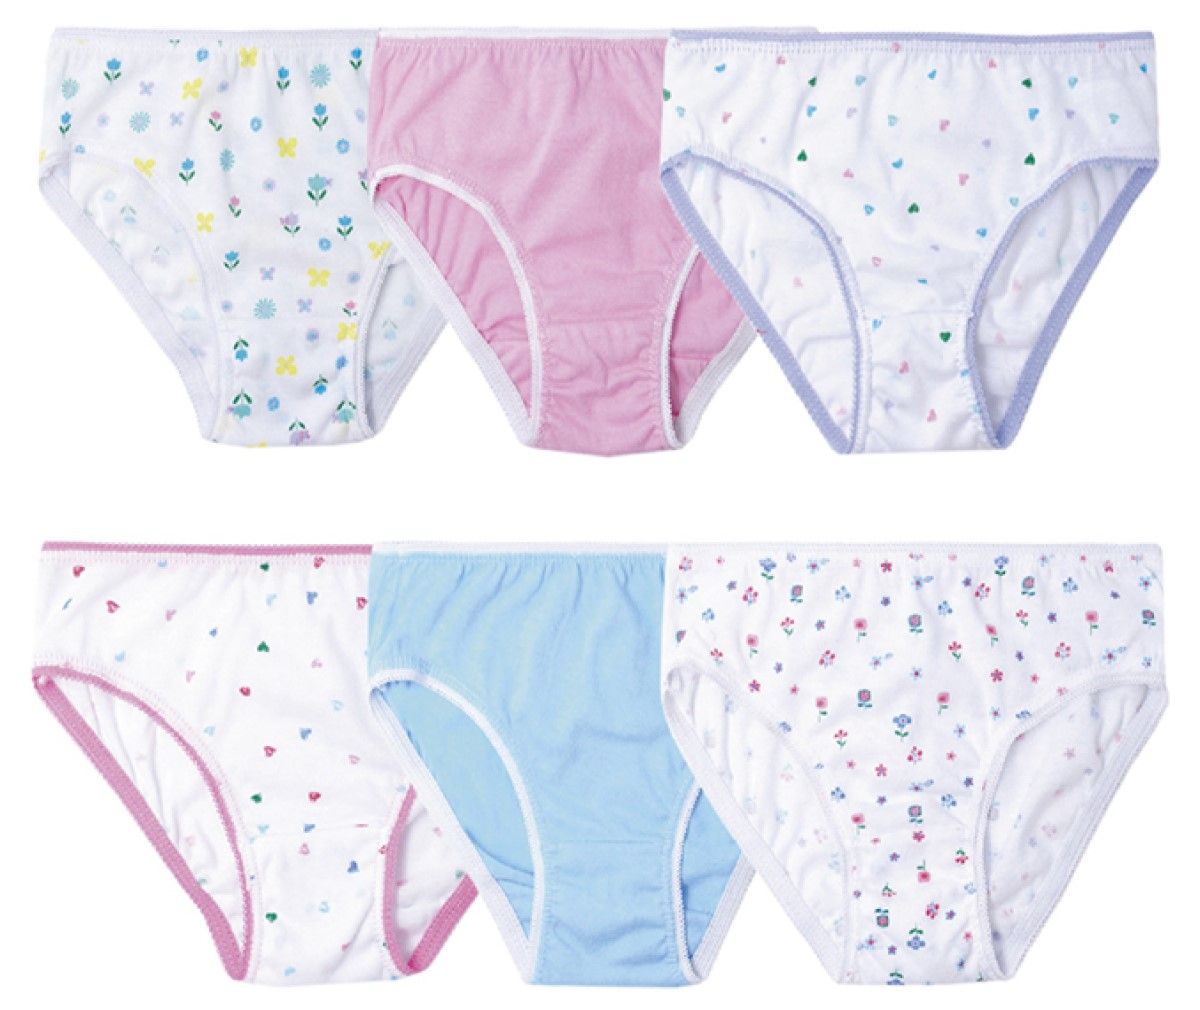 Girls 6 PK Cotton Knickers Briefs "Hearts and Flowers"